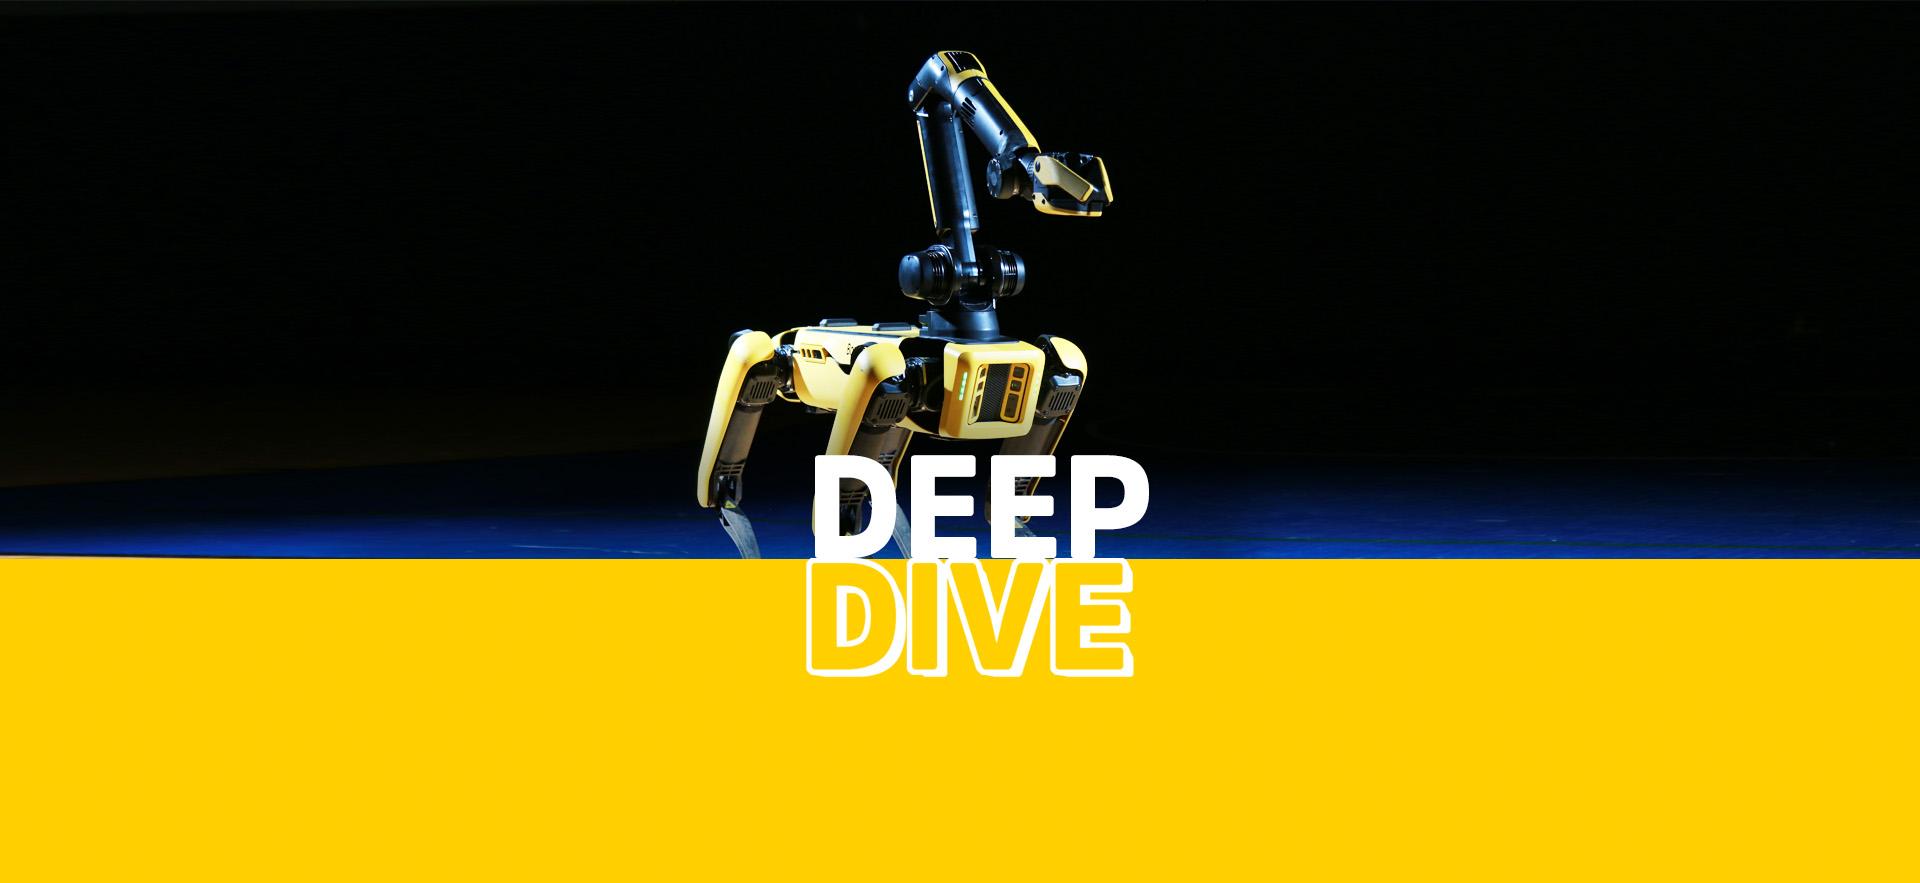 Deep Dive Engineering with image of Spot the Robot Dog